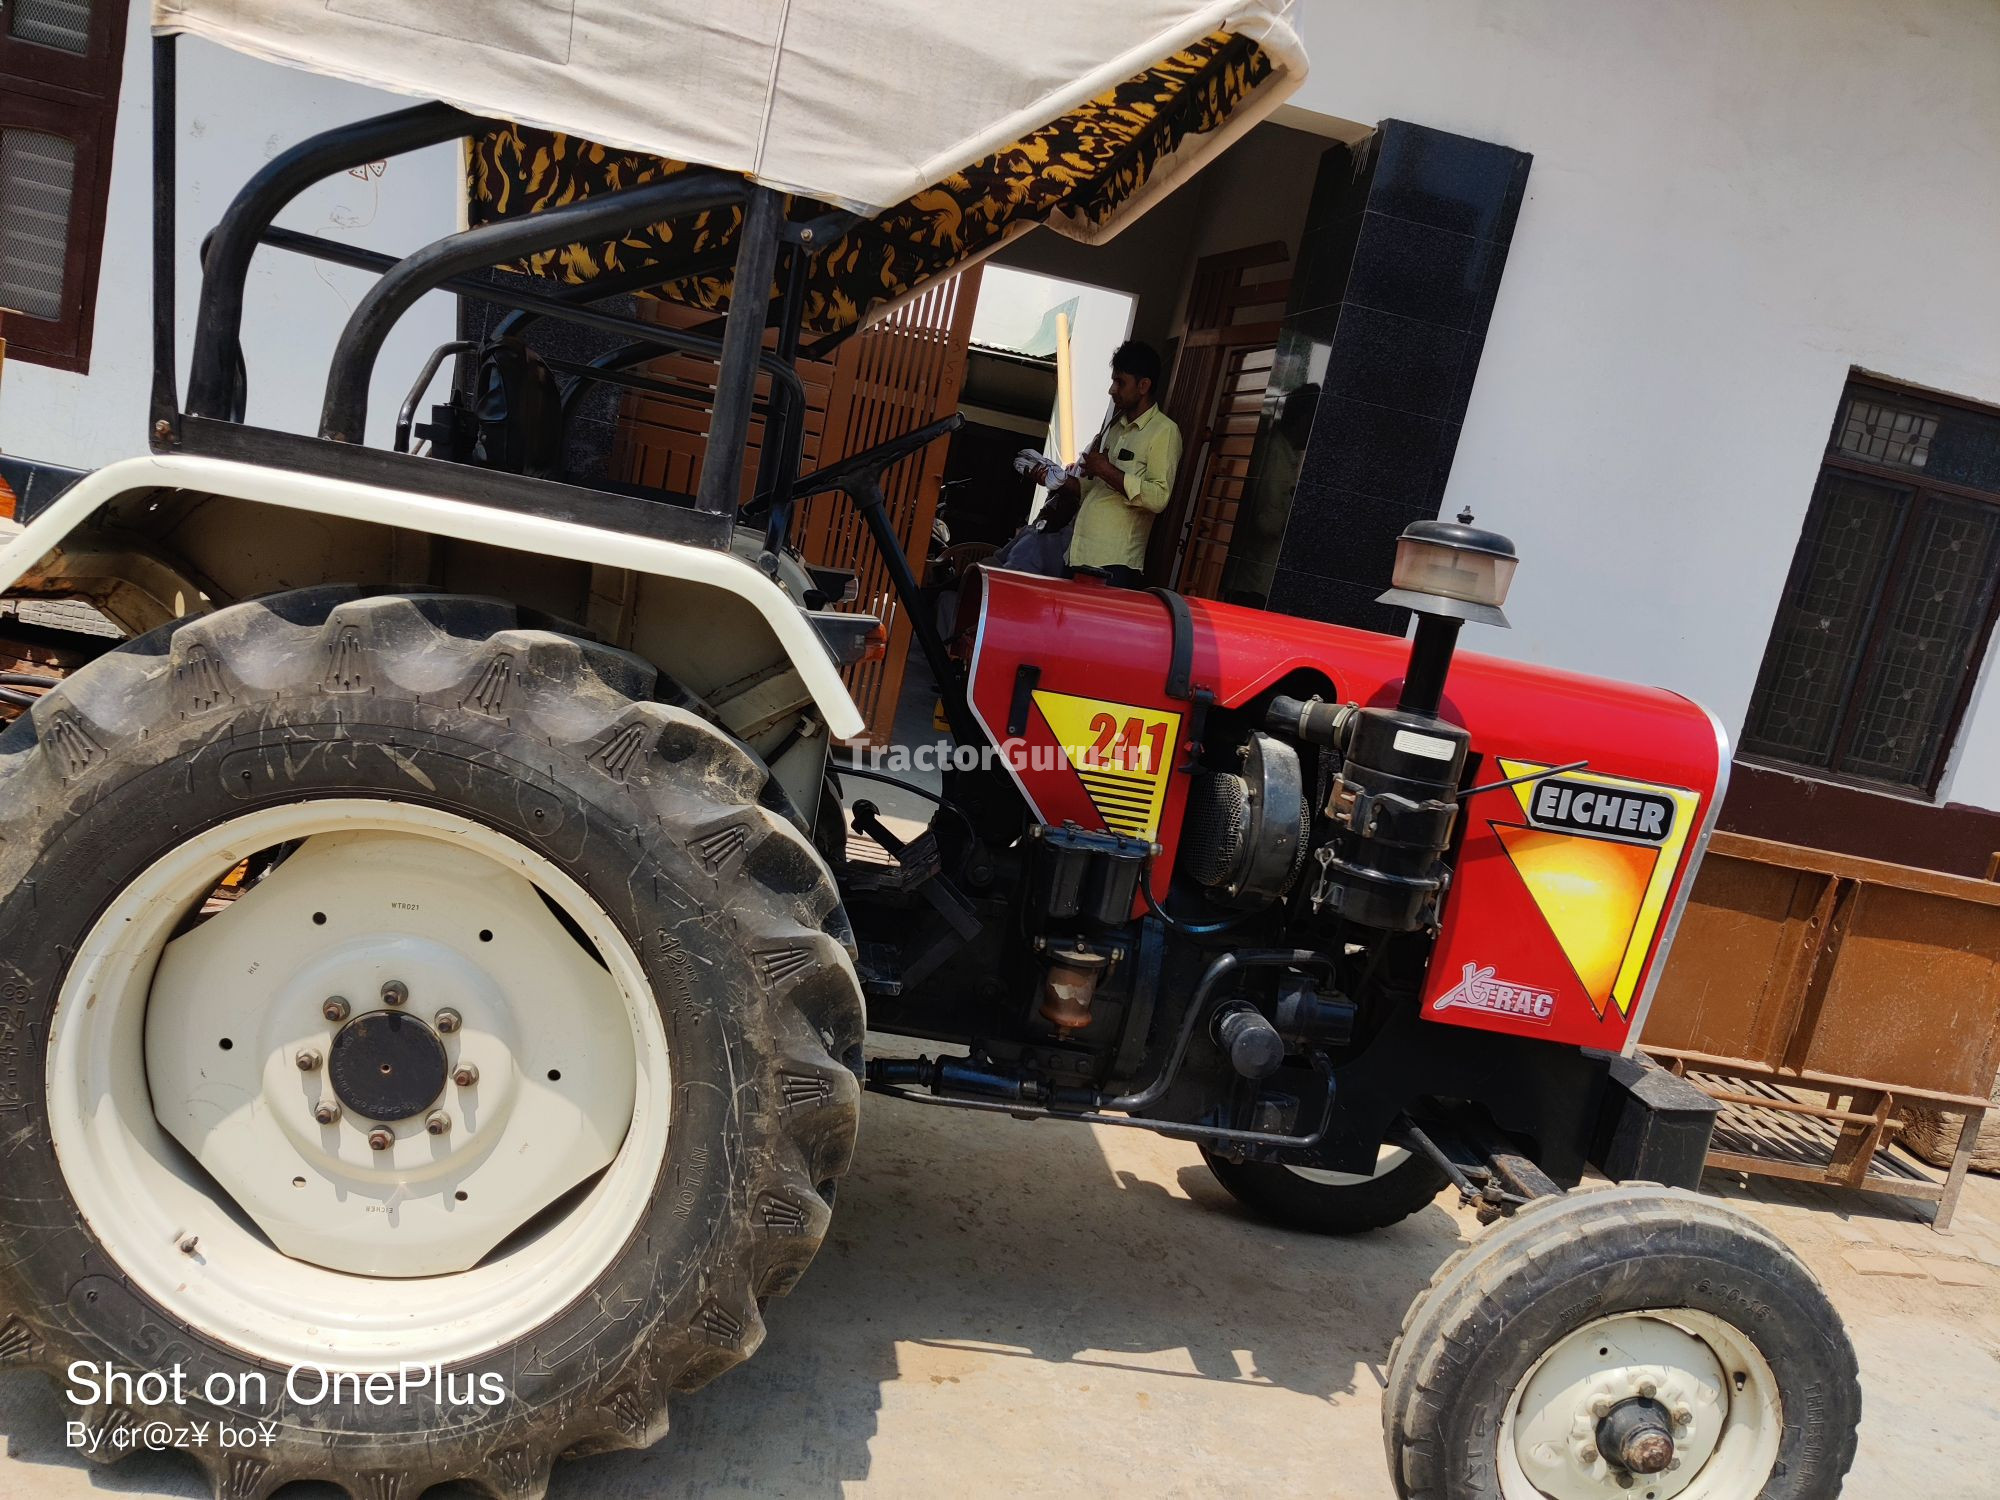 Get Second Hand Eicher 241 XTRAC Tractor in Good Condition - 6615